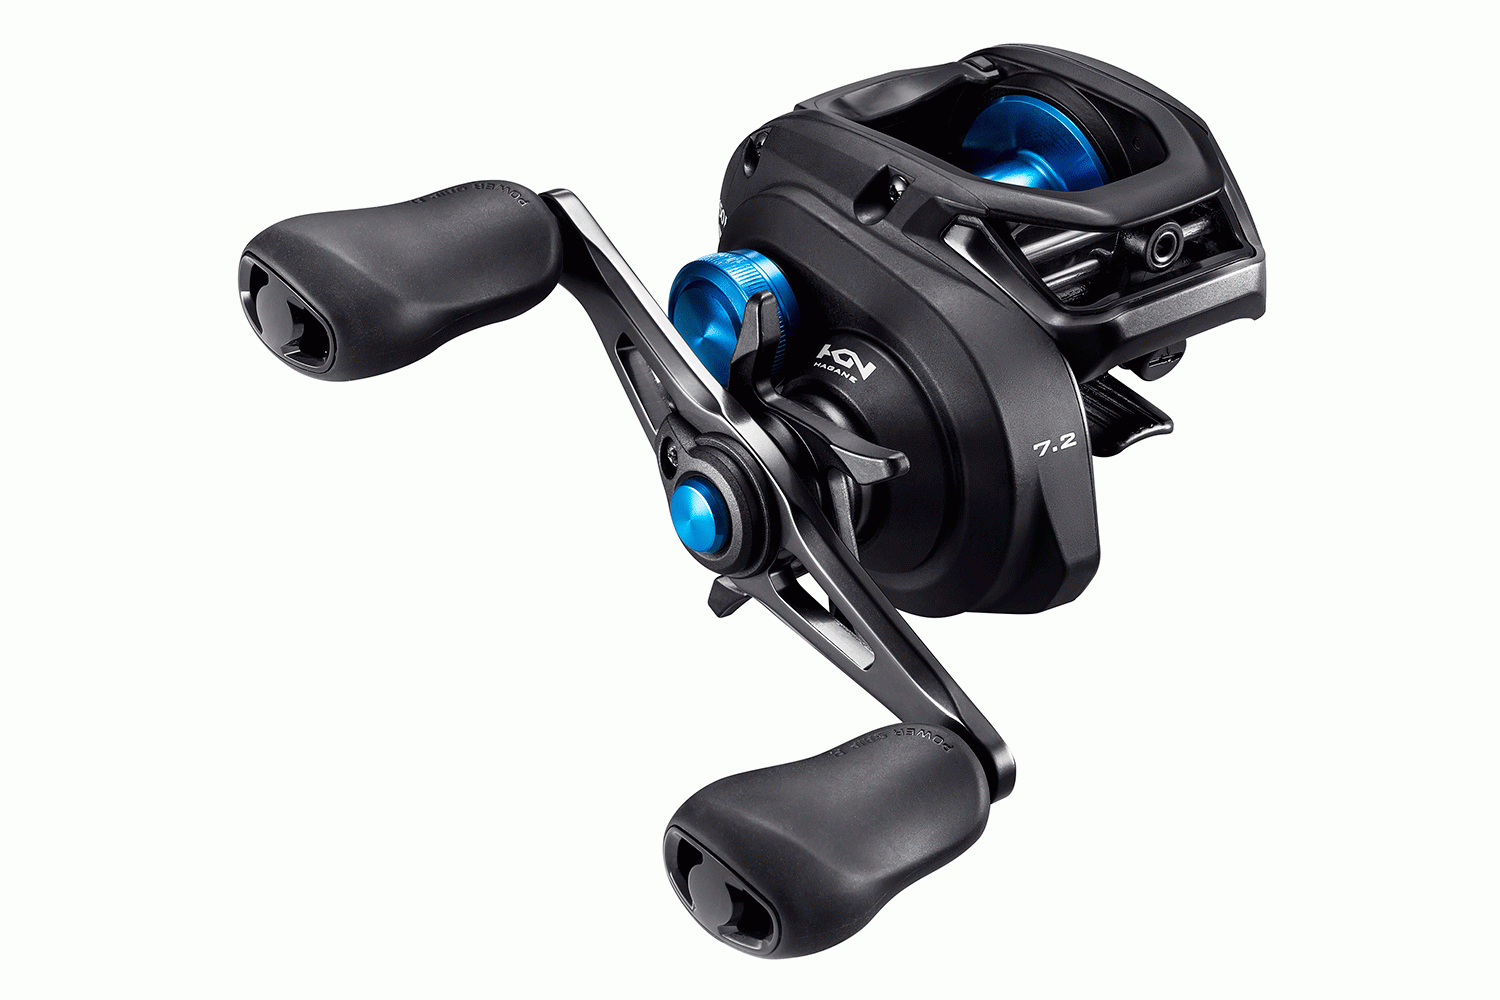 <p><b>Shimano SLX, $99.99</b></p> SLX is compact, rigid and versatile. At just 6.9 ounces, it is the lightest reel in its class, even with its ultra rigid, durable, all metal HGN Body frame. SLX is over 20 percent more compact than its predecessor, while maintaining the same great line capacity. With three gear ratios to choose from and a long, powerful handle, SLX offers tournament anglers a complete series of reels, that wonât break the bank.<br> <a href=